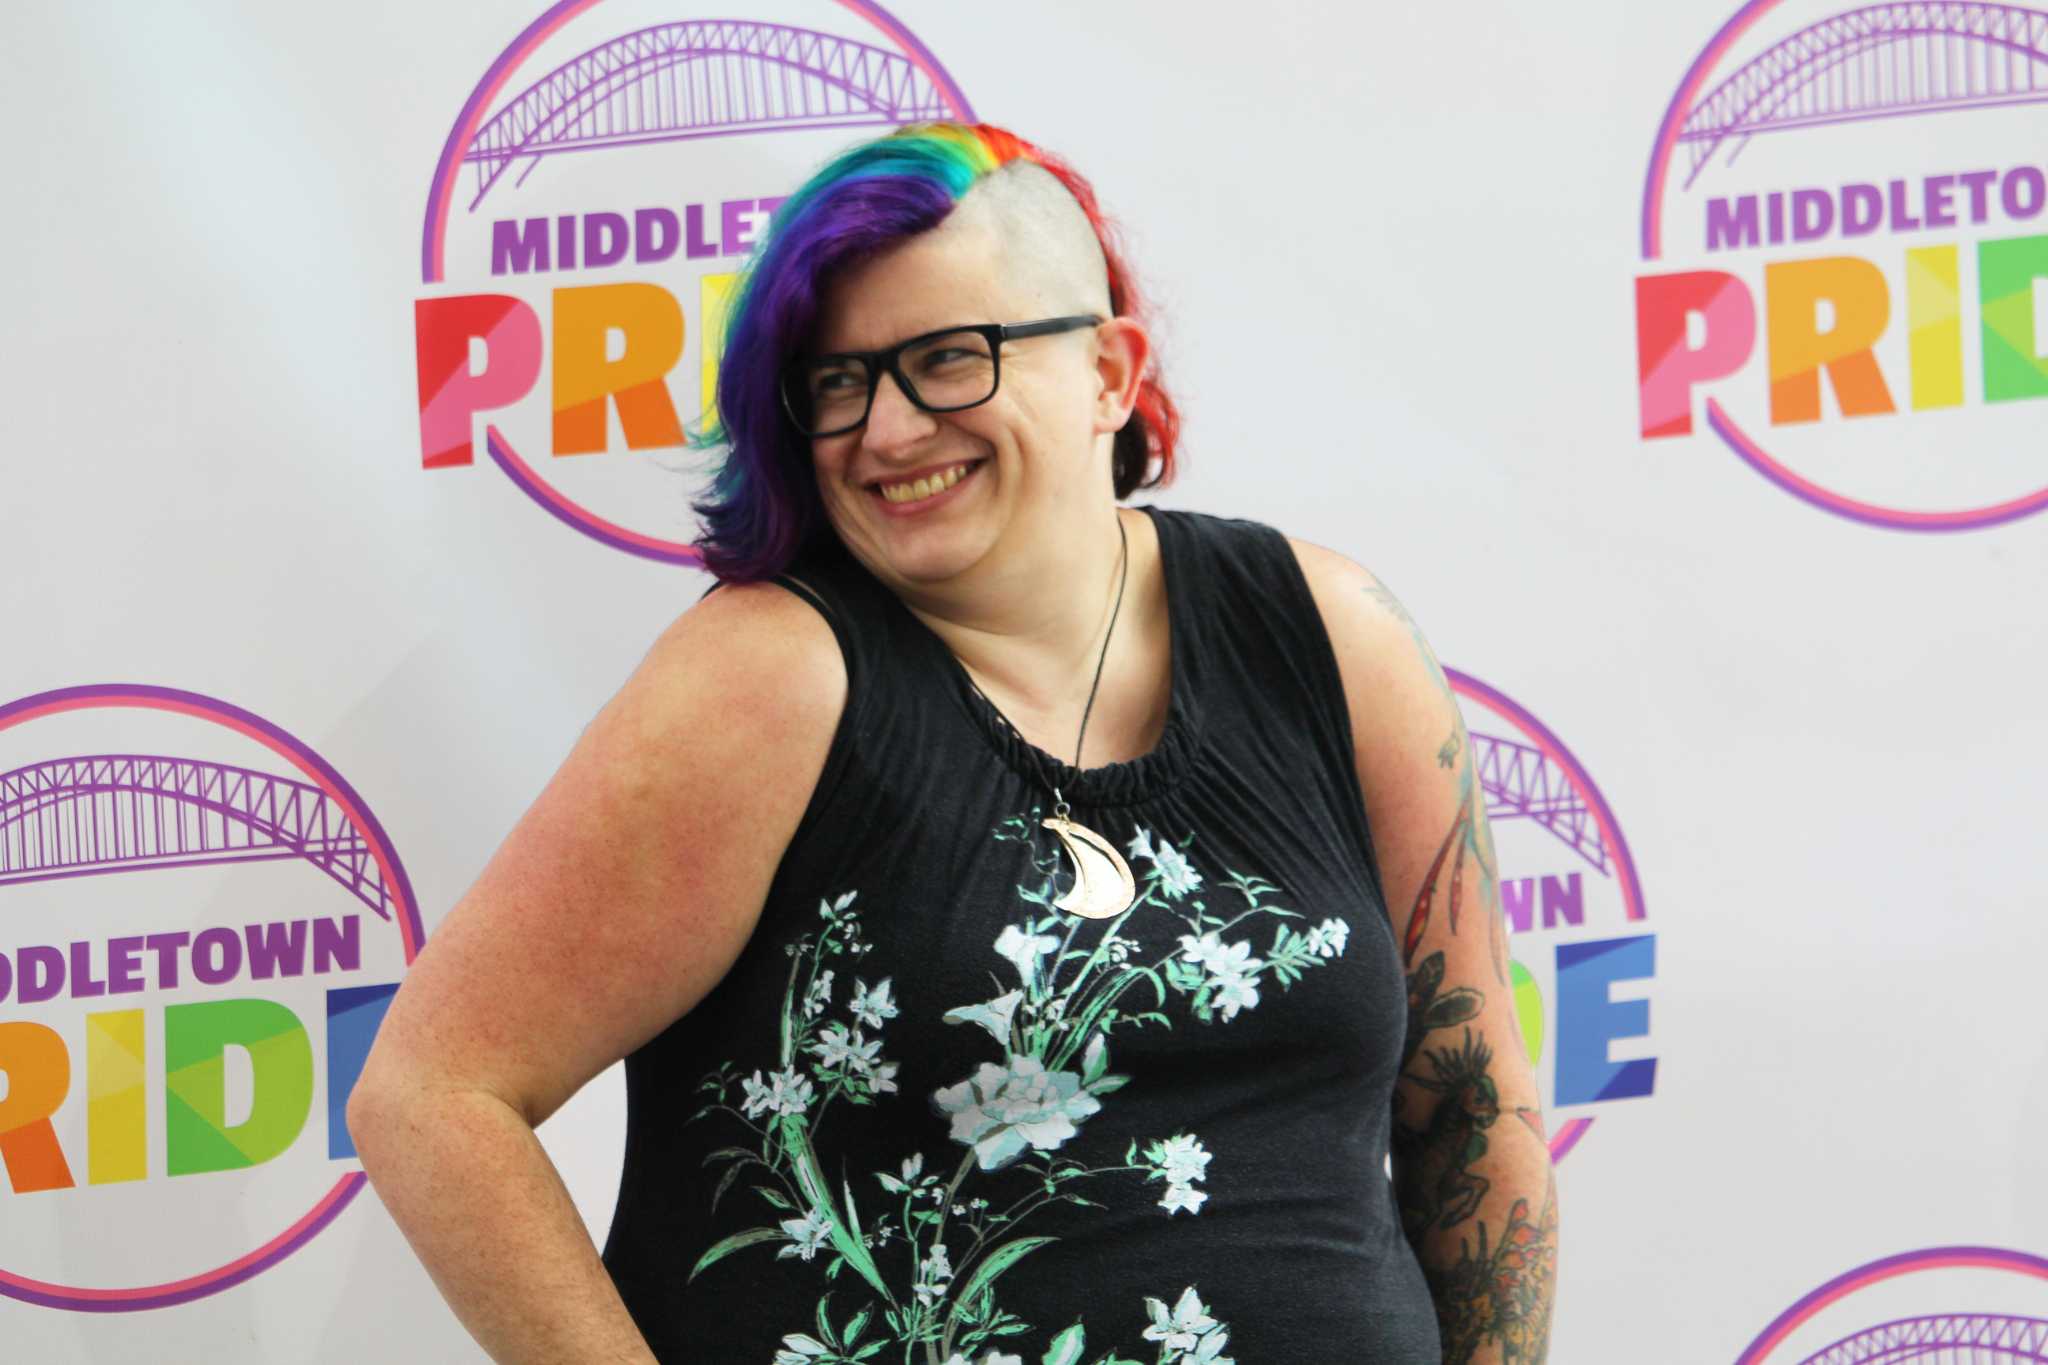 Middletown's 2nd Pride fest shaping up to be an event of 'magnitude